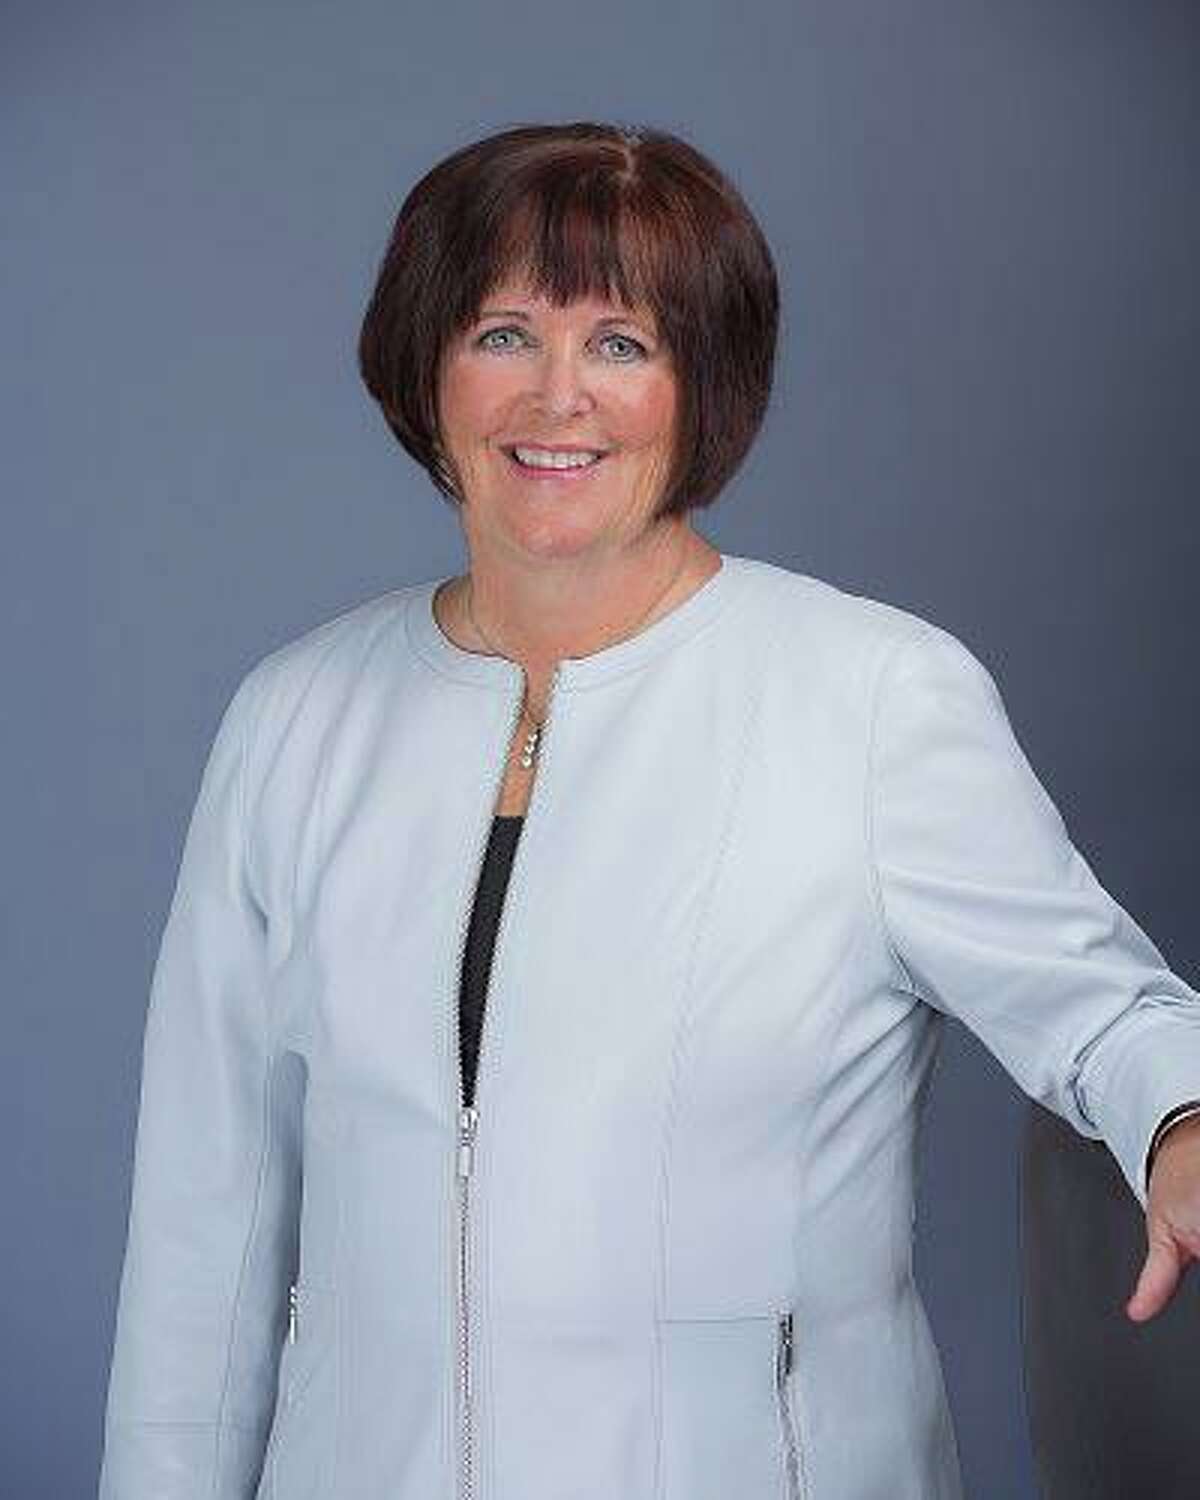 Synchrony Chief Executive Officer Margaret Keane will step down as the company’s CEO and become its new executive chairwoman, the company announced on Tuesday, Jan. 12, 2021.